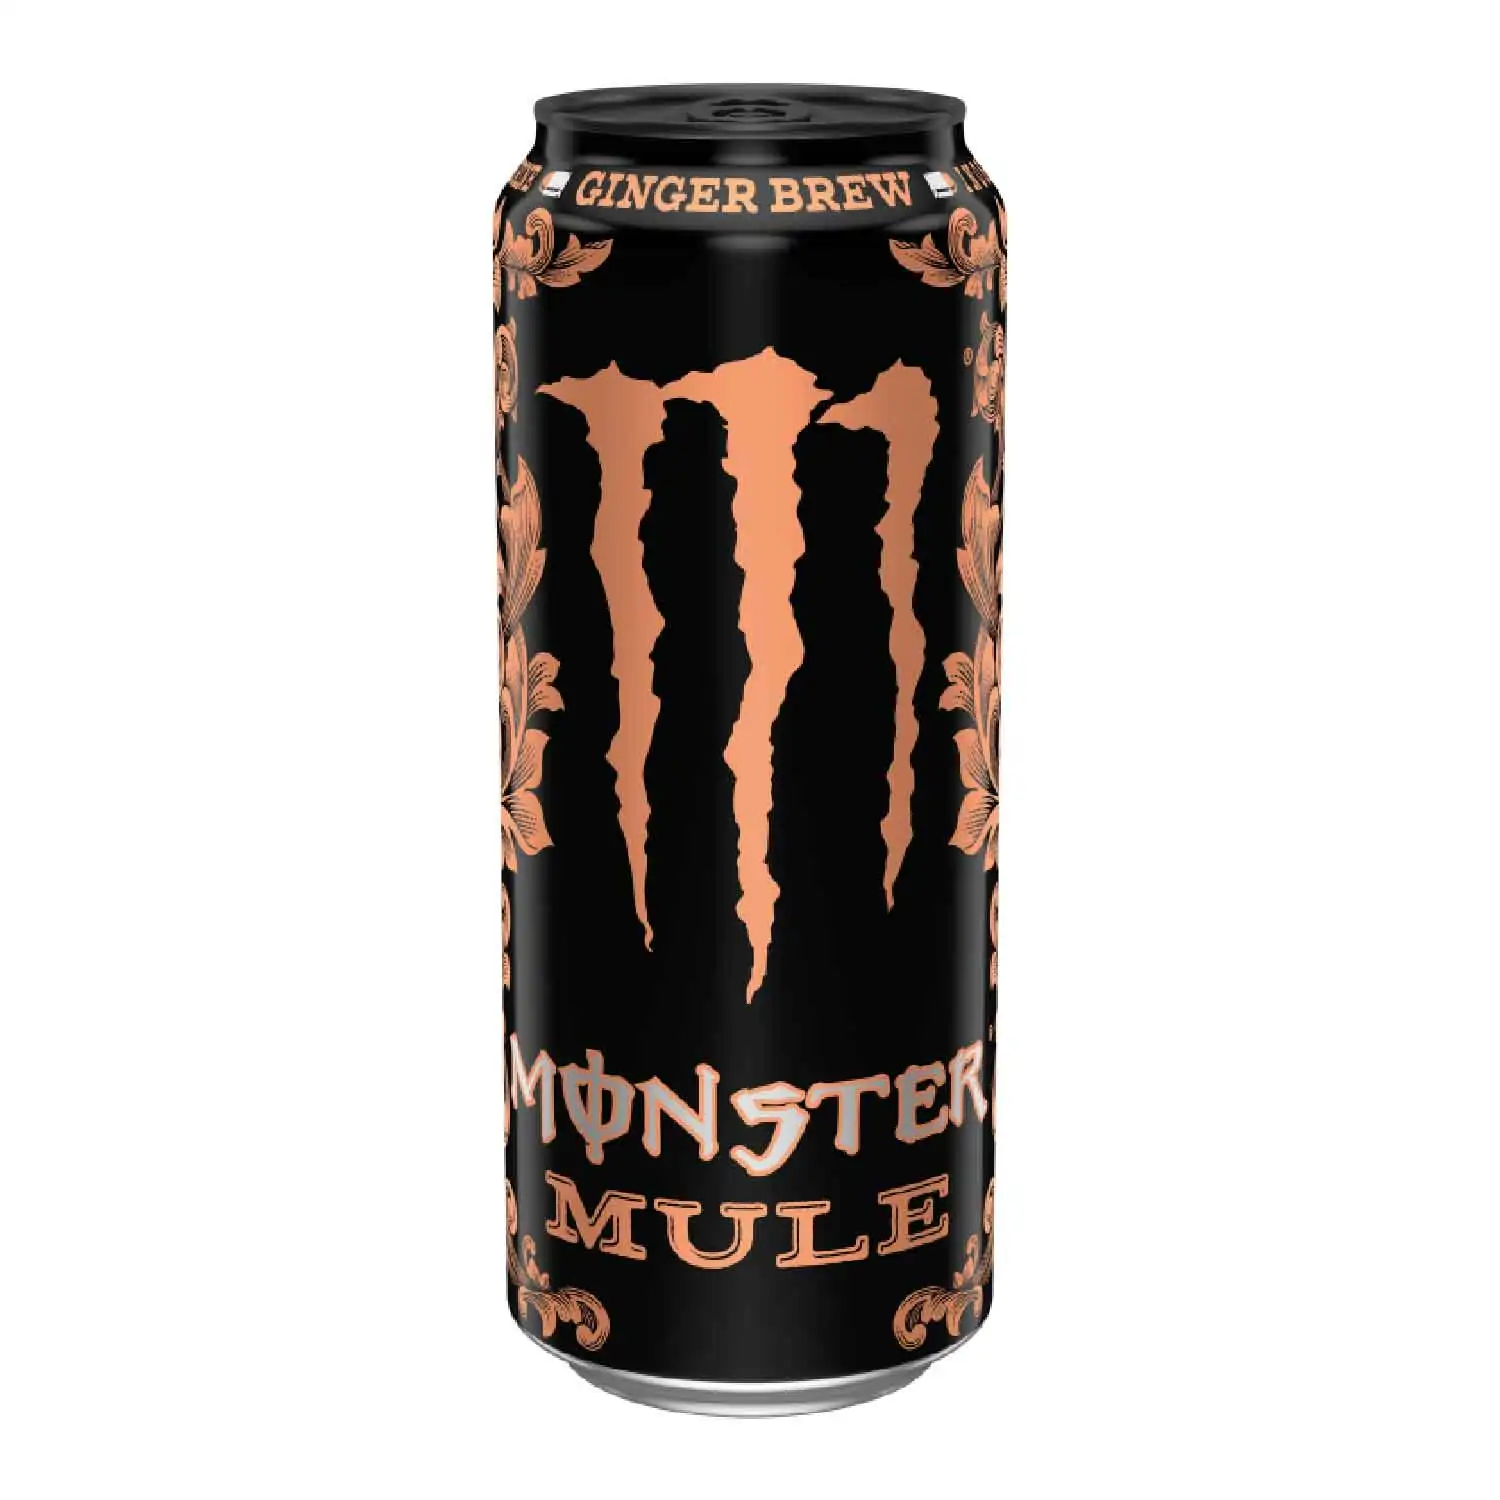 Monster mule ginger brew 50cl - Buy at Real Tobacco